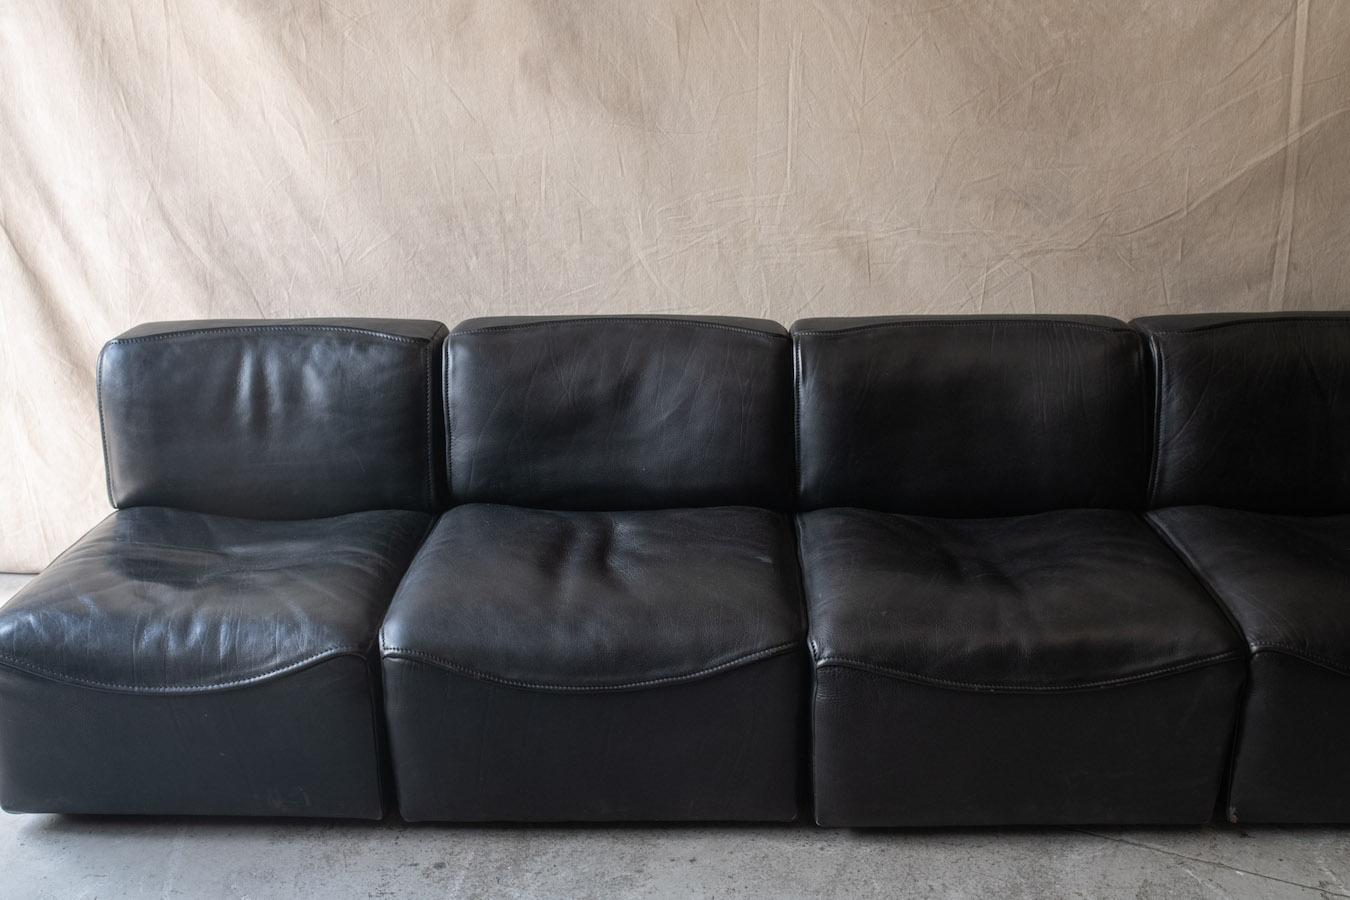 Vintage leather De Sede sectional sofa, Model 'DS-15', Switzerland, 1970s. Six modular pieces to conform as you like. Original, thick neck leather with light wear and patina. 

We don't have the time to write an extensive description on each of our